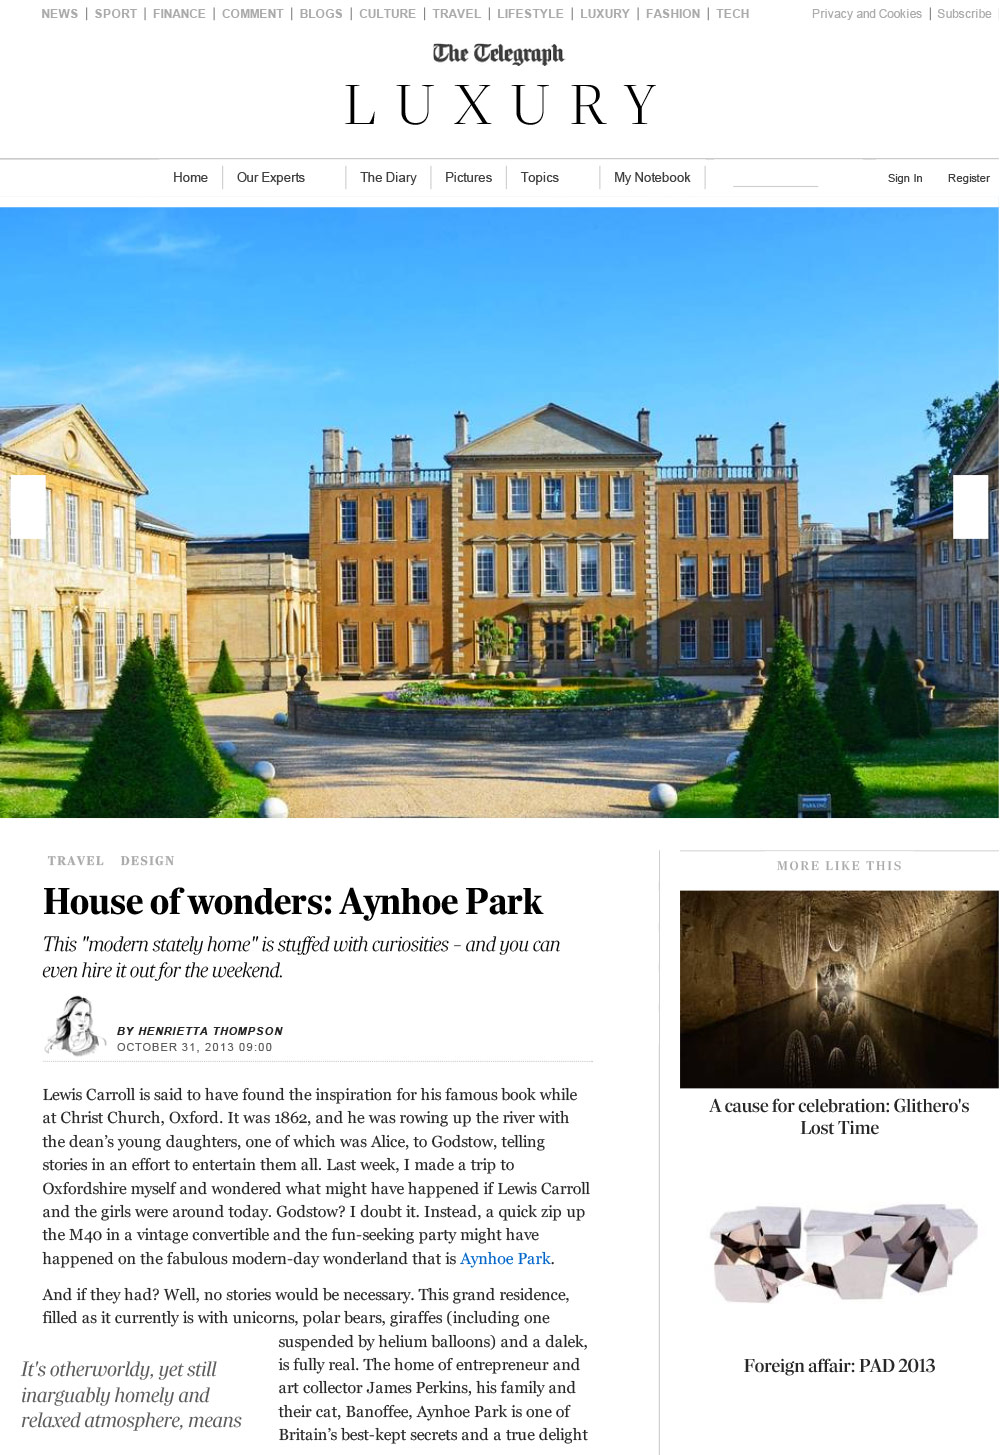 Aynhoe Park in The Telegraph